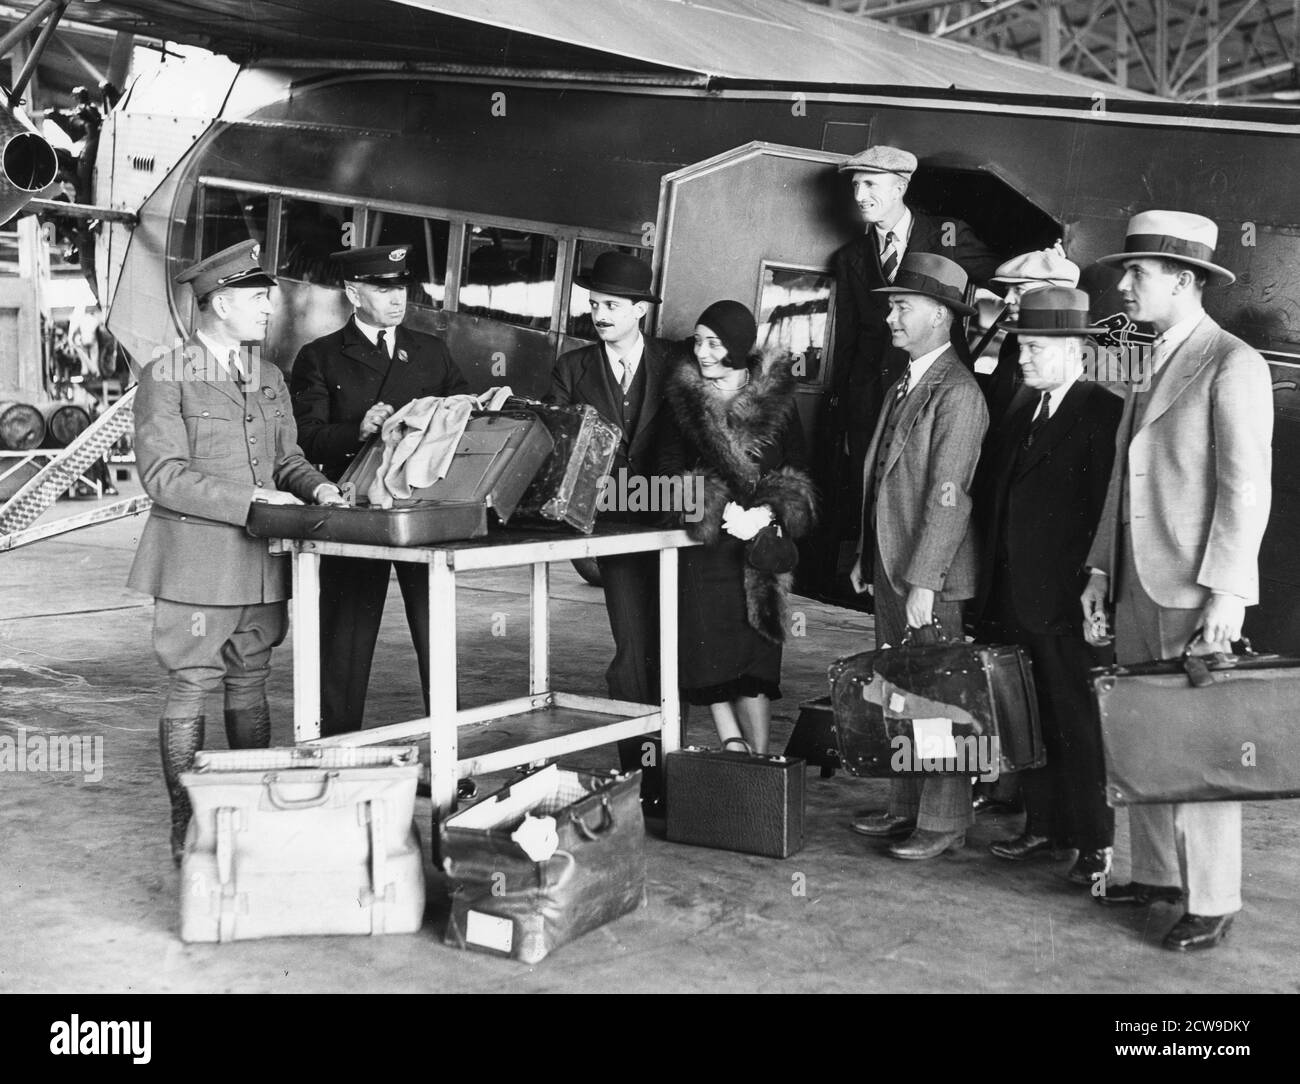 Customs inspectors check the baggage of passengers as they deplane from a Fokker F-10 operated by Western Air Express, Alhambra, CA, 1929. (Photo by Western Air Express/PhotoQuest/RBM Vintage Images) Stock Photo